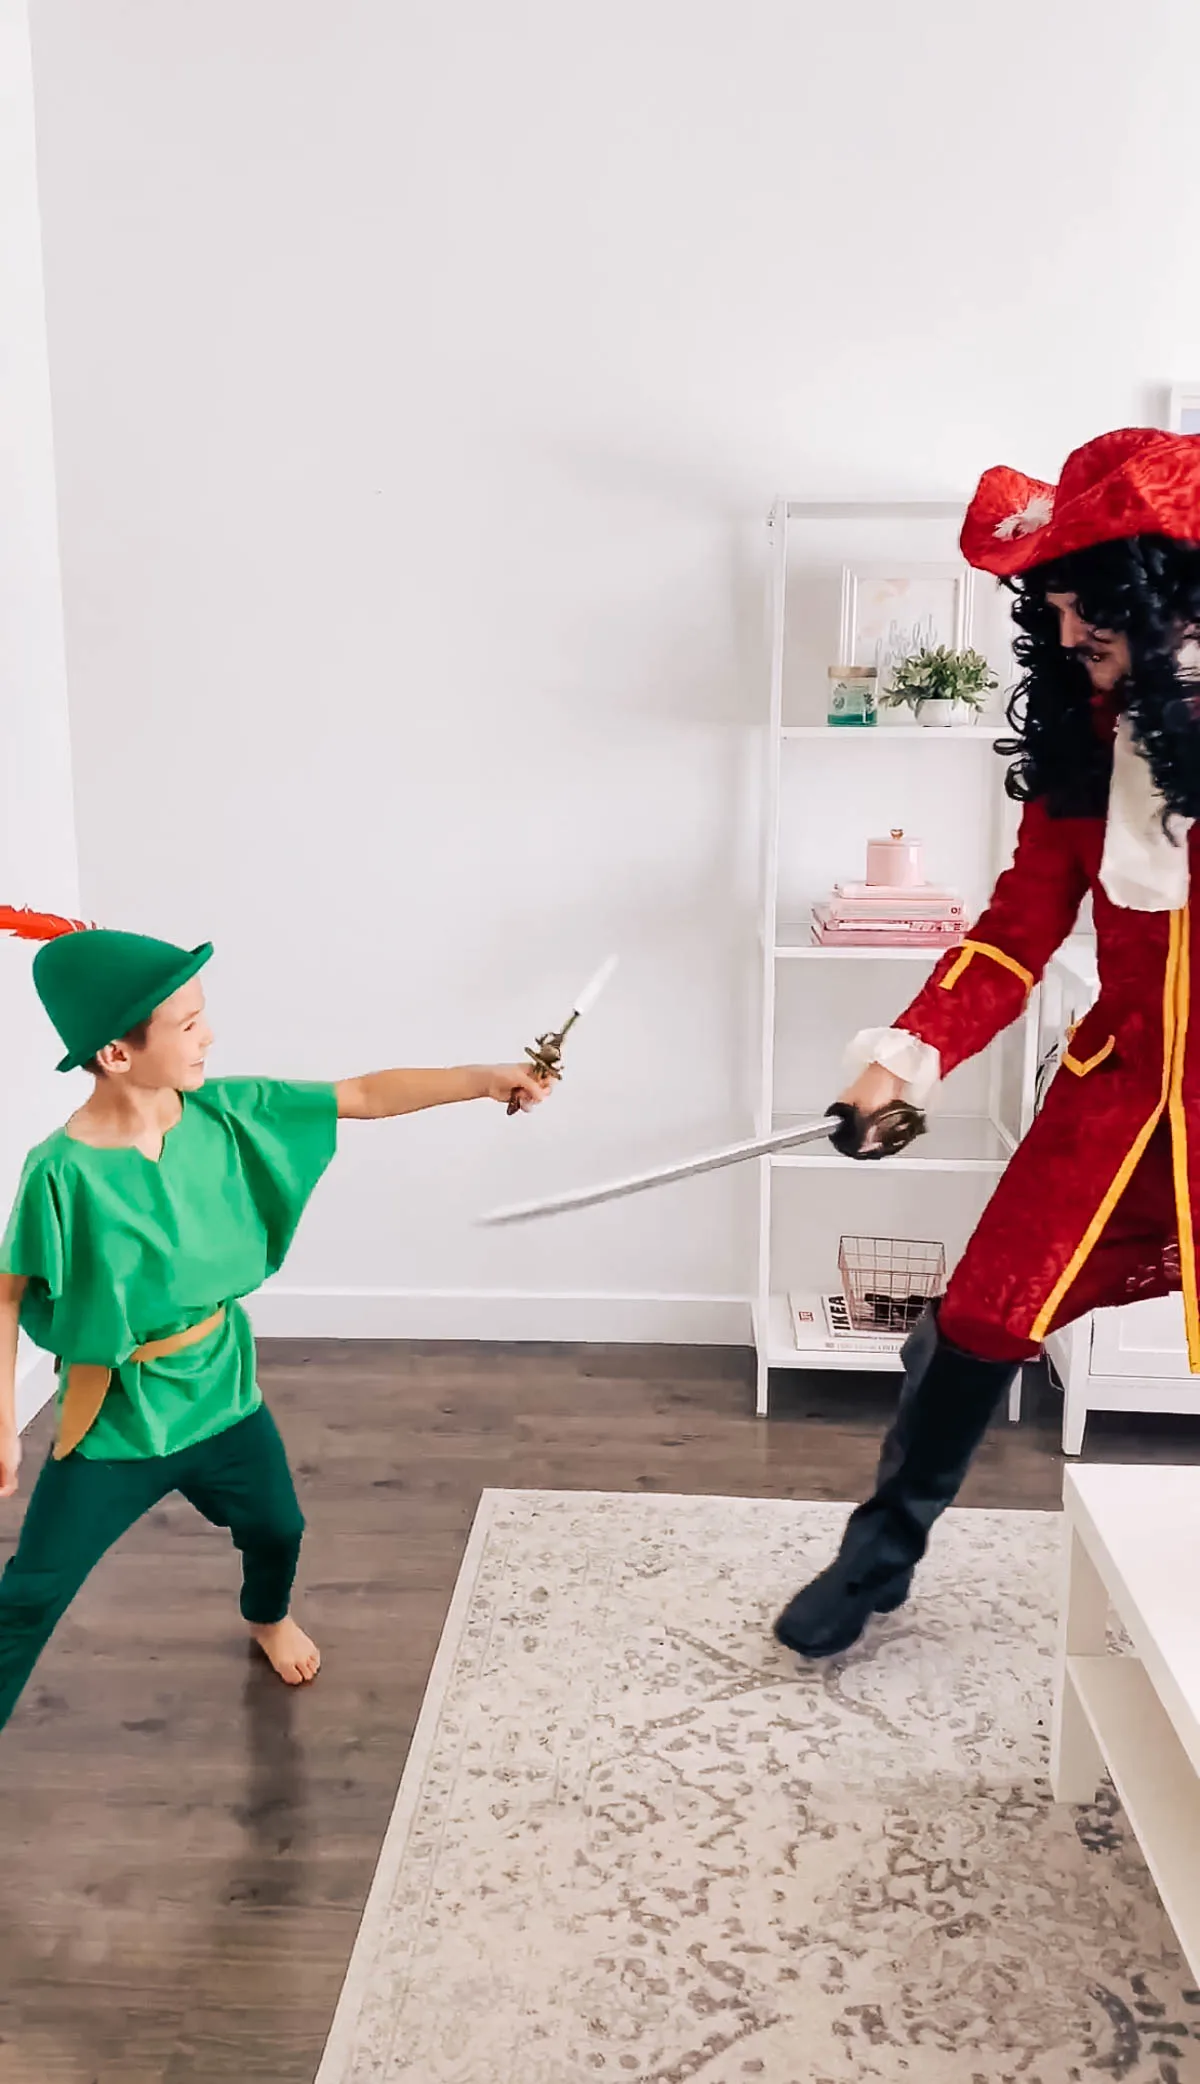 Boy dressed as Peter Pan pretends to fight with man dressed as Captain Hook.